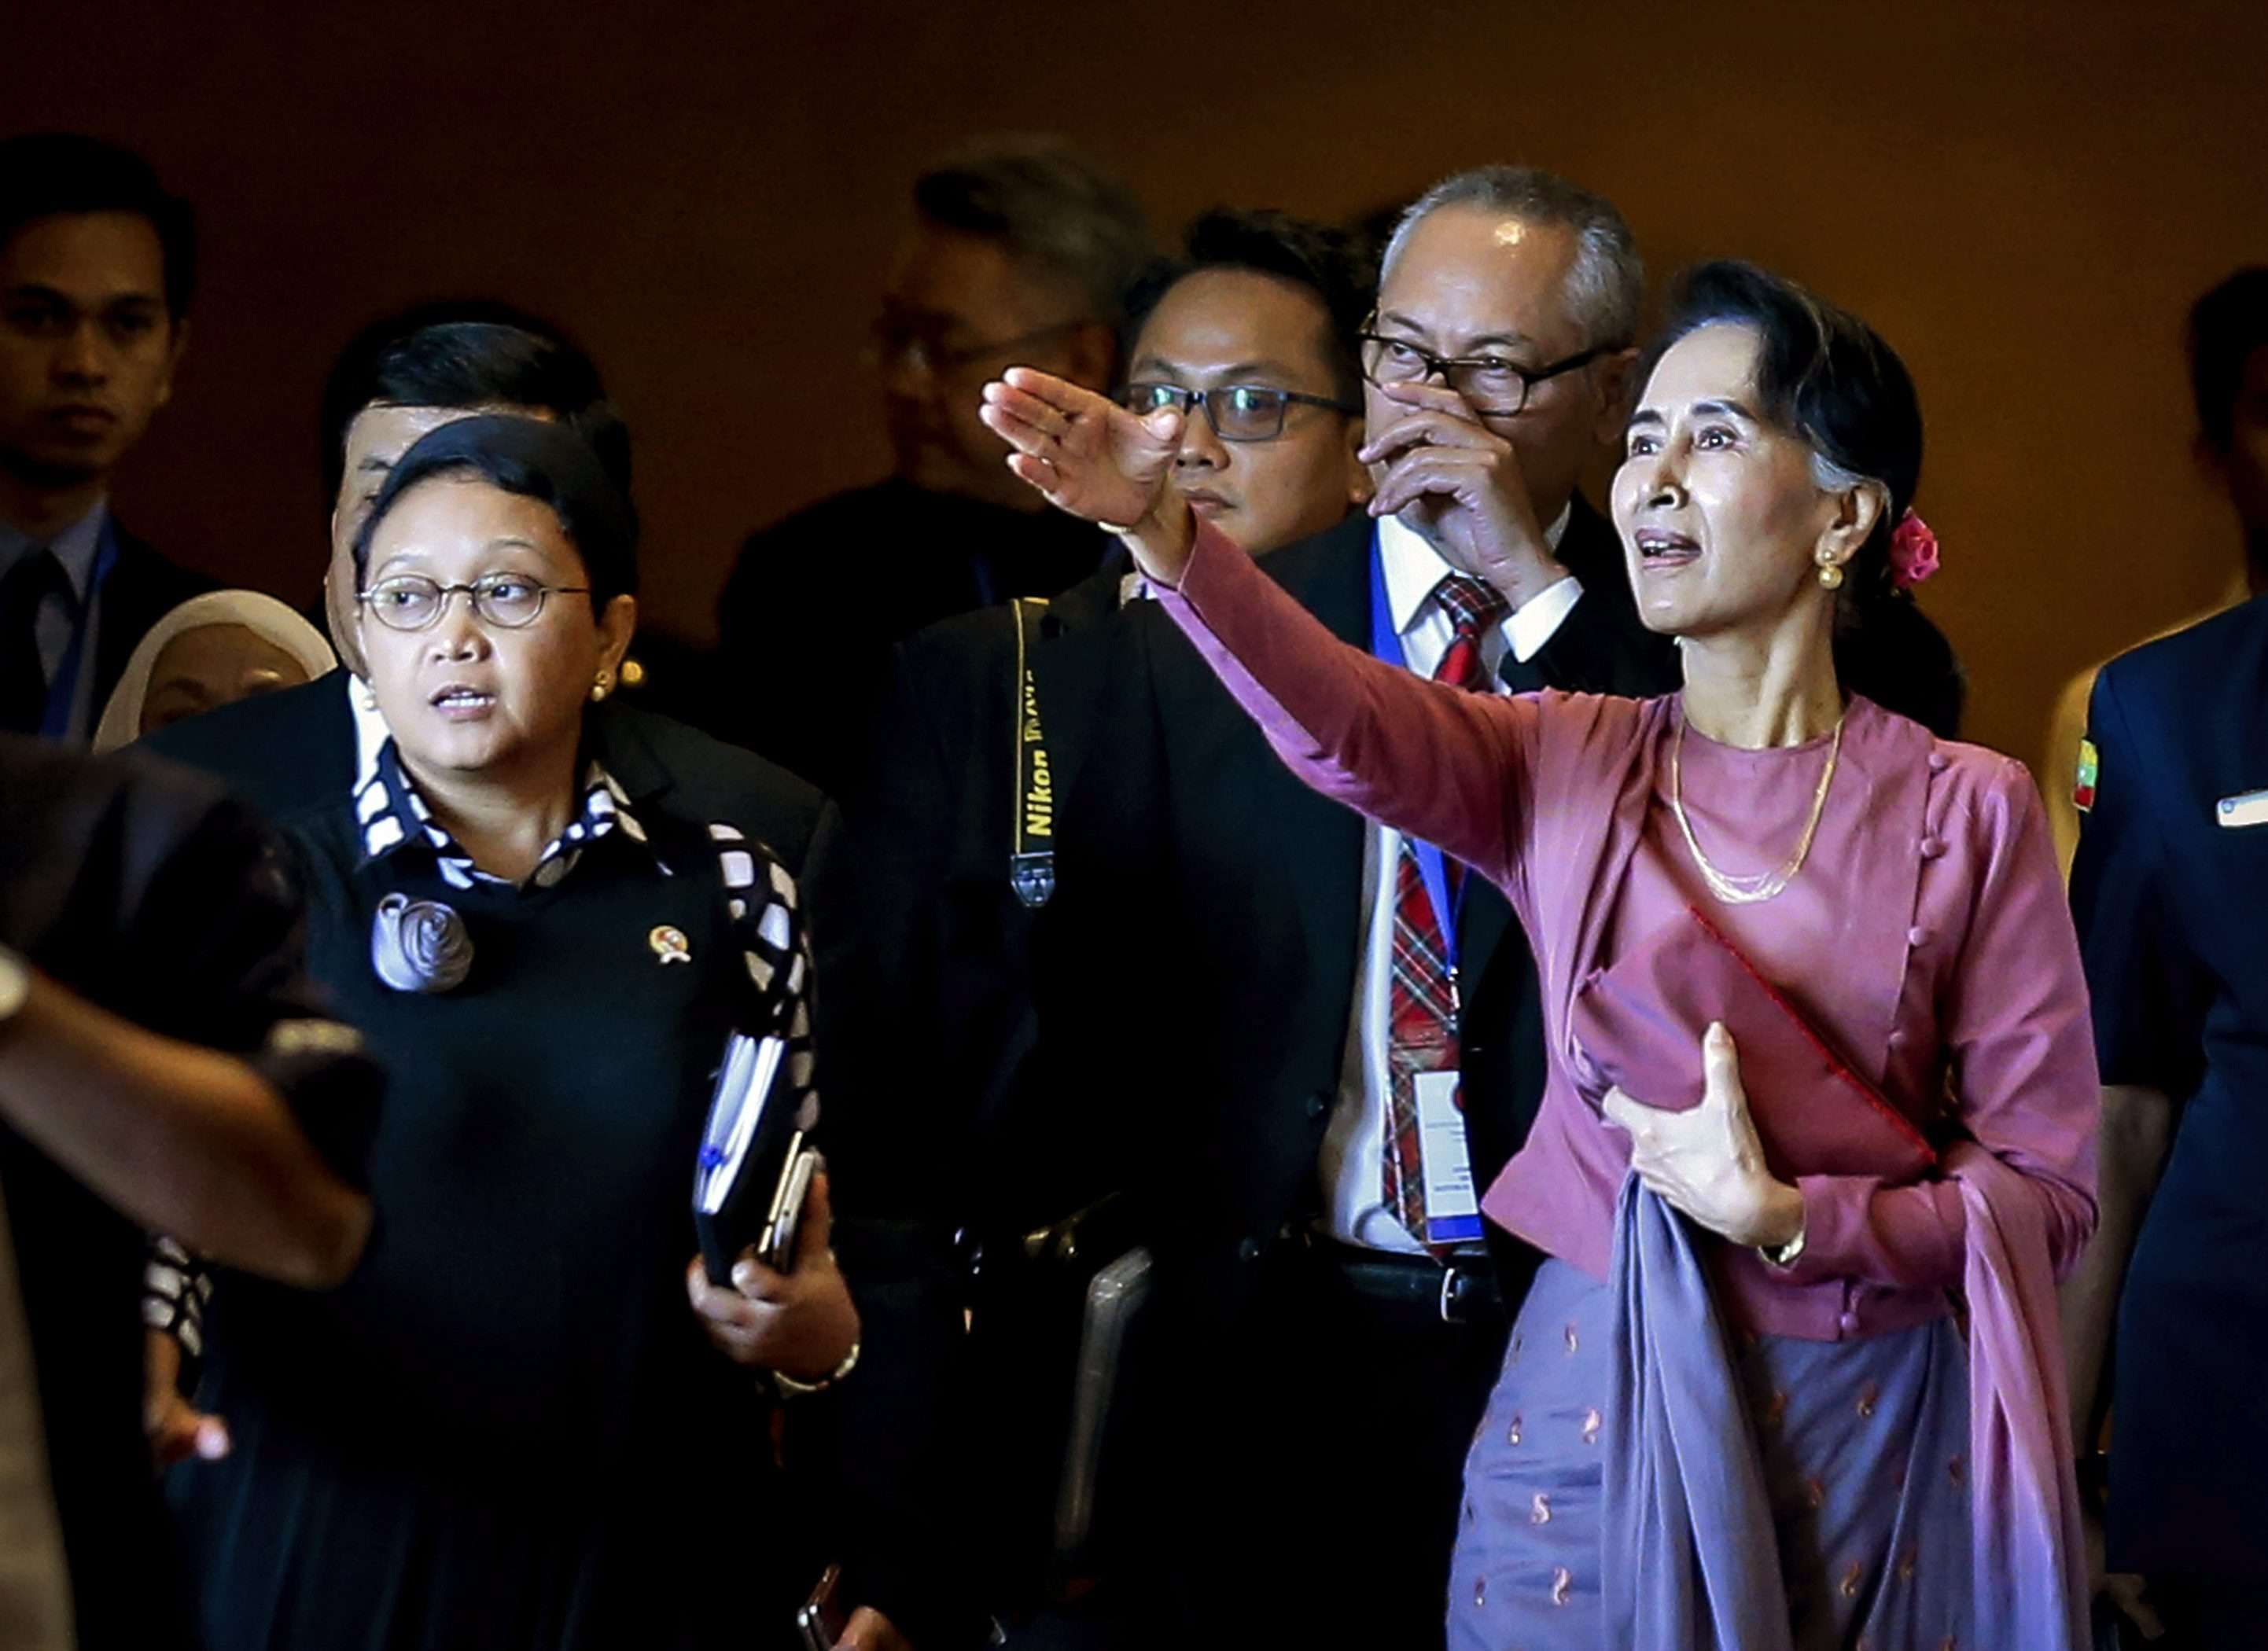 Aung San Suu Kyi, state counsellor and foreign minister of Myanmar, gestures as she and Indonesian Foreign Minister Retno Marsudi leave the Asean Foreign Ministers’ meeting in Yangon where the Rohingya issue was discussed, on December 19. Photo: EPA